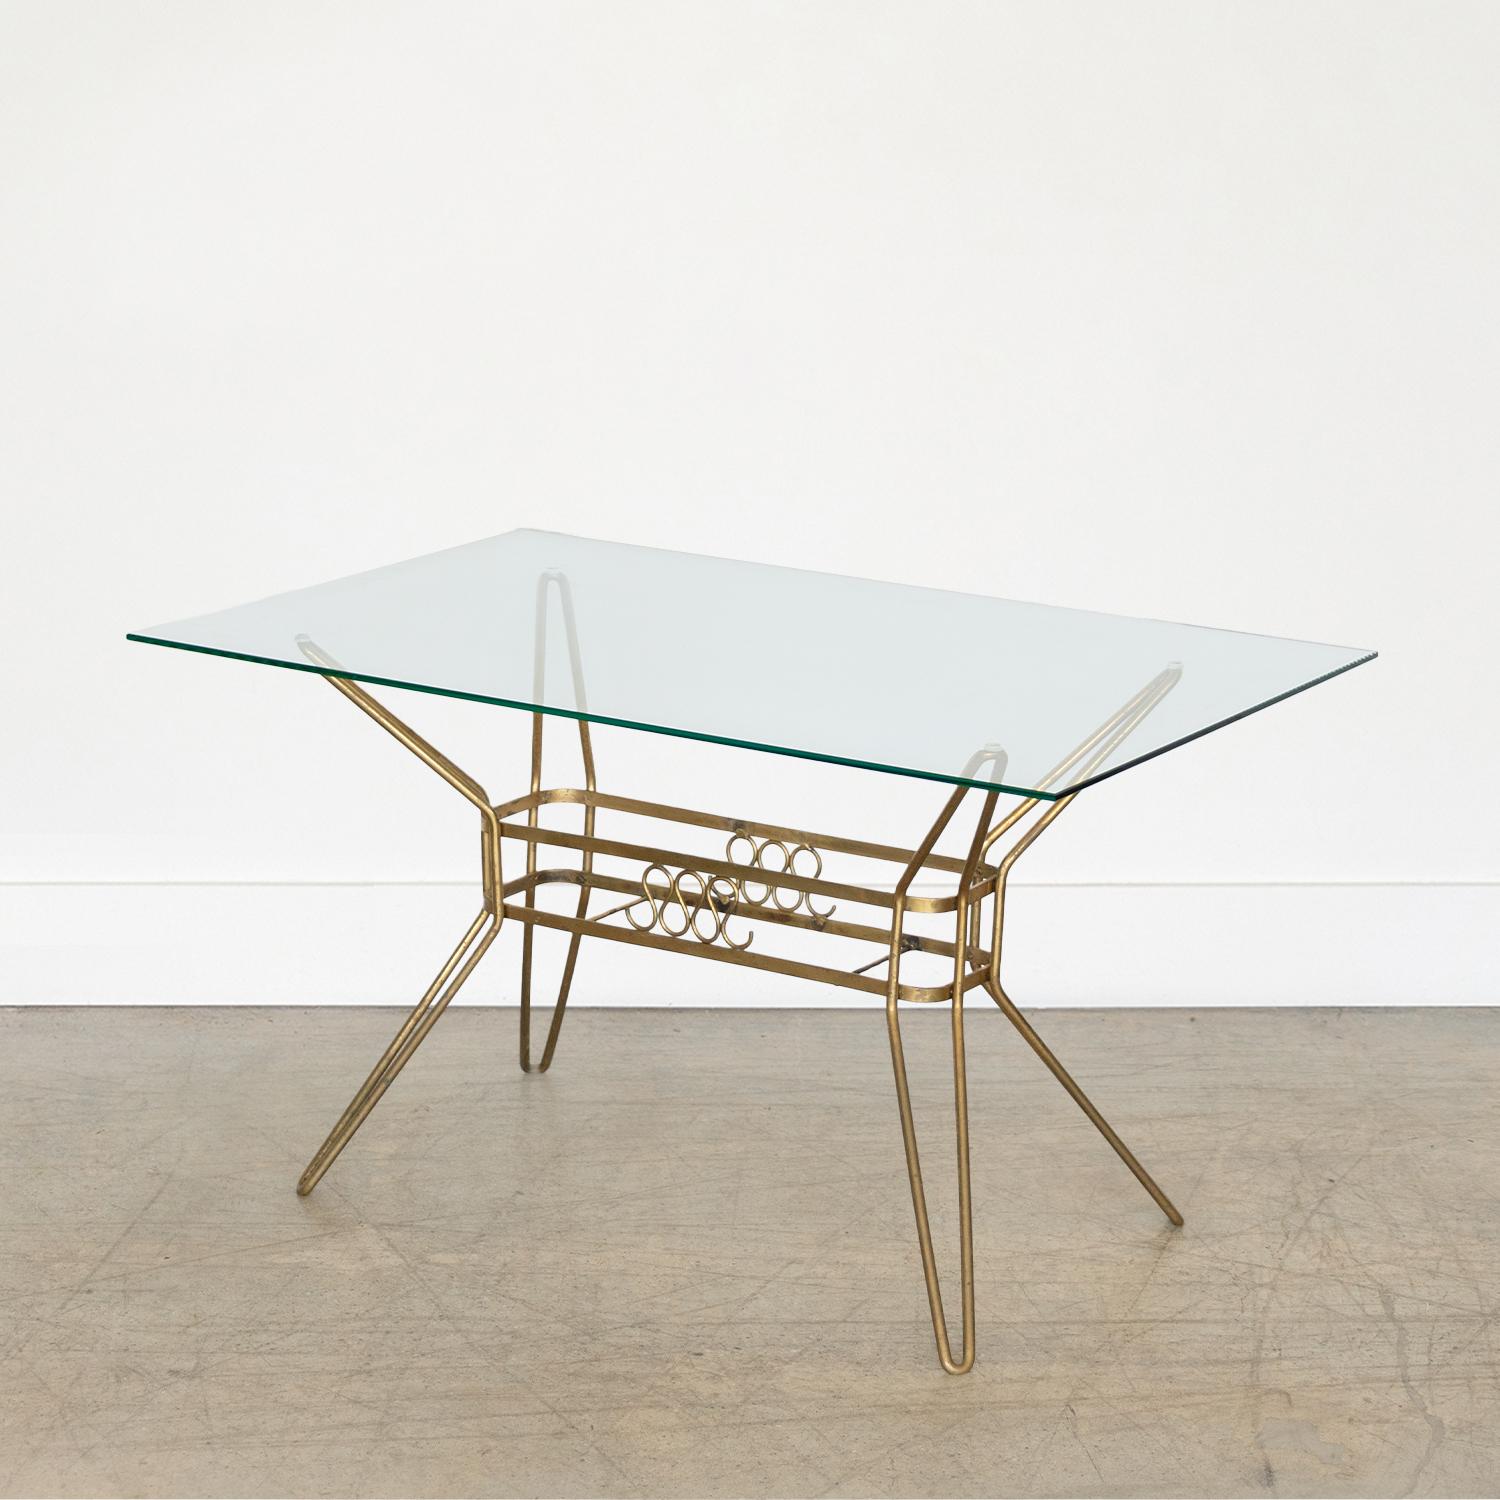 Stunning Italian brass rectangular table with glass top from the 1950s. Original brass base with four angled hairpin legs and beautiful loop detailing at center. Newly made glass top. Perfect for a side or small coffee table. Original finish shows